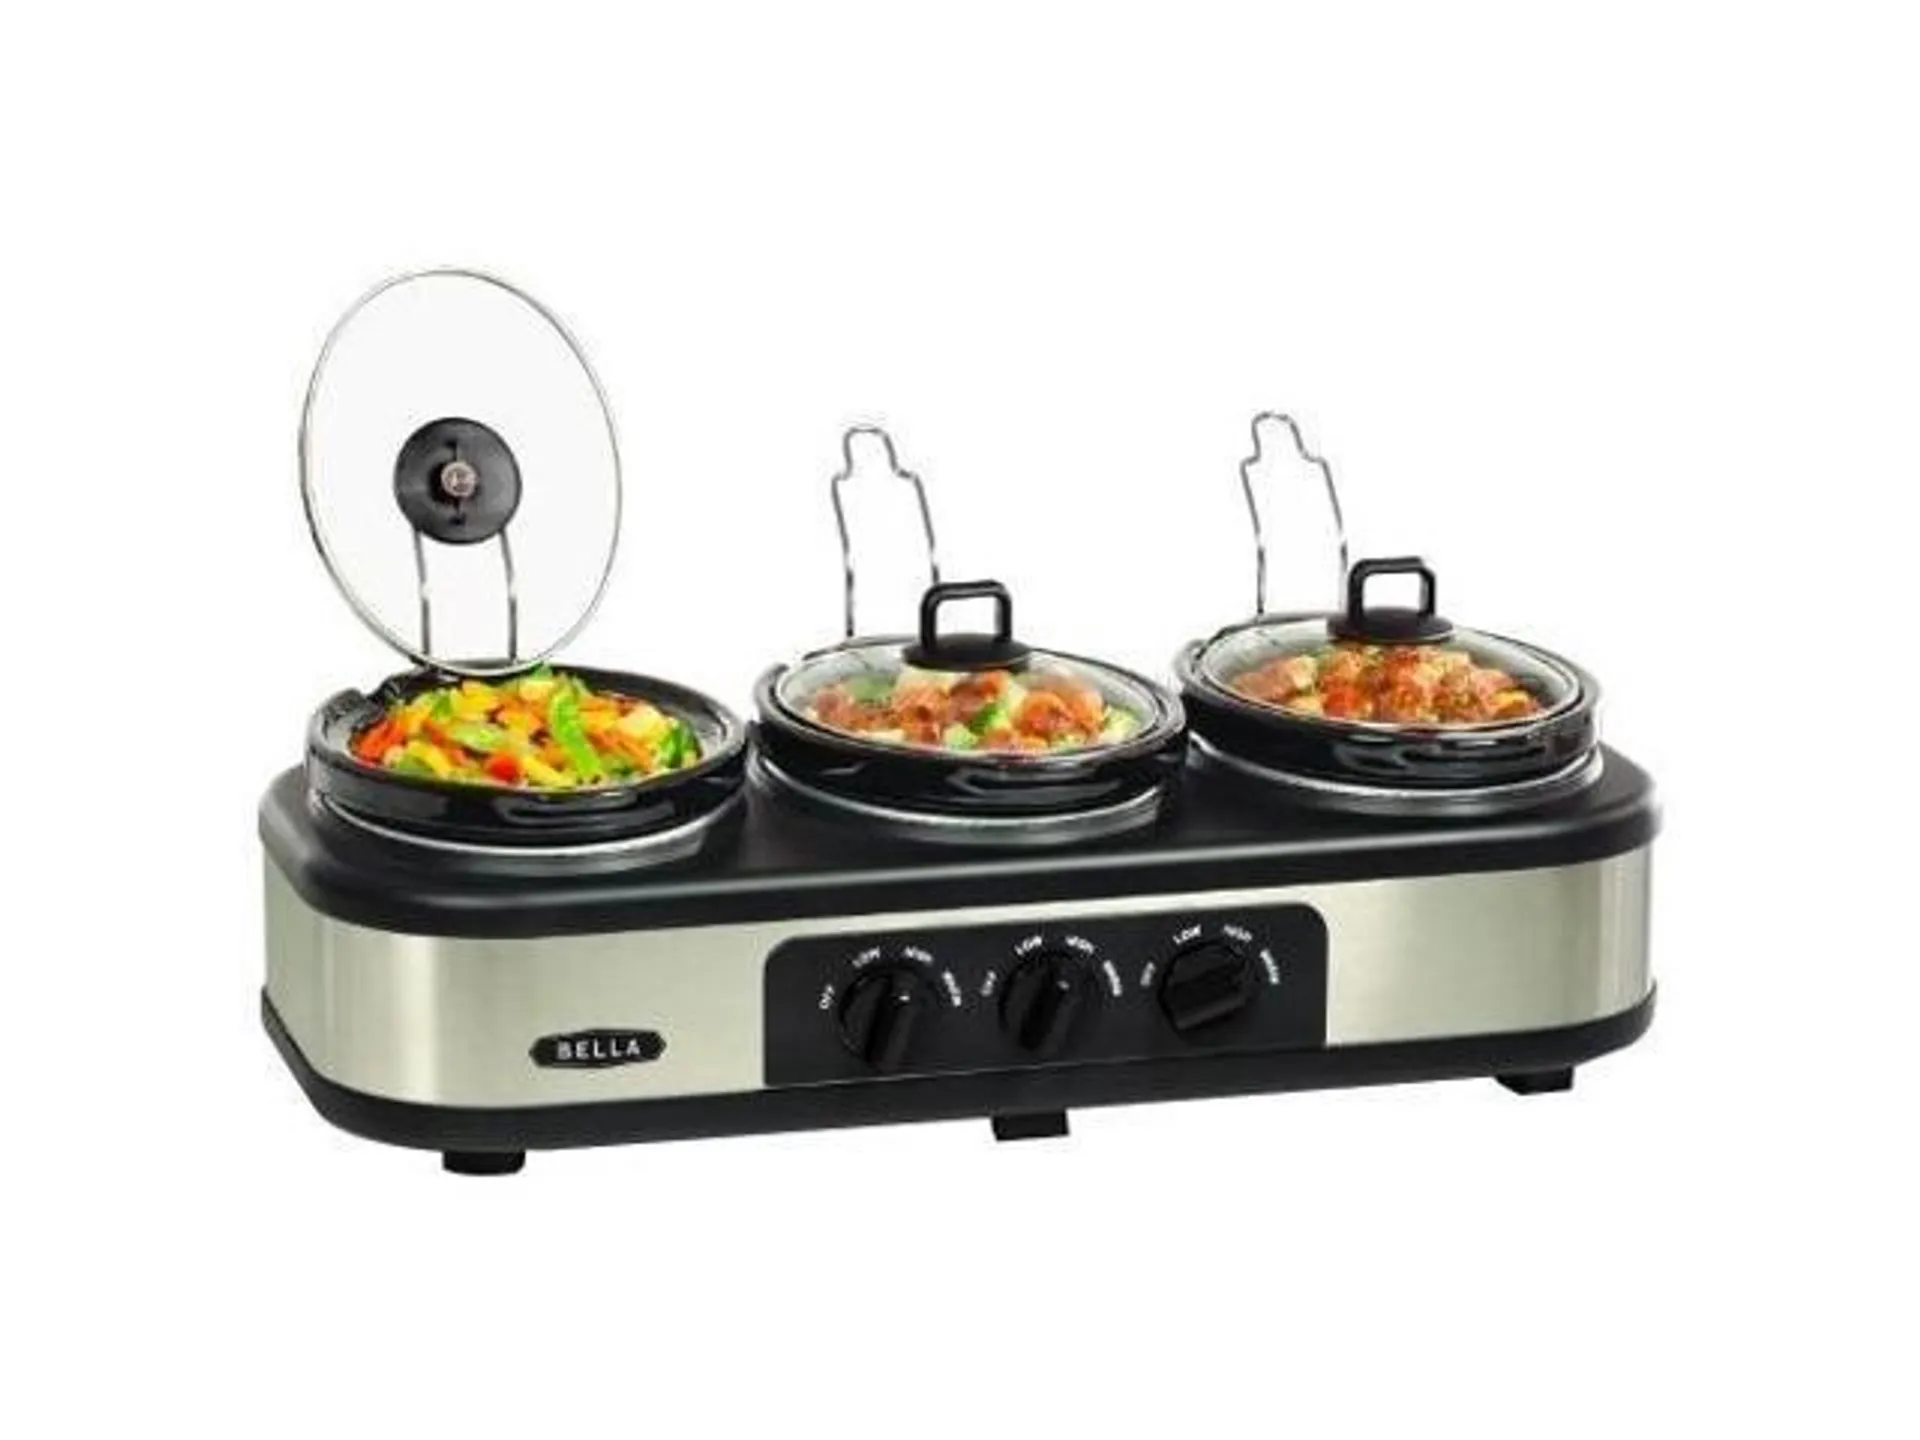 Bella 3X1.5QT Oval Triple Slow Cooker with Lid Rests